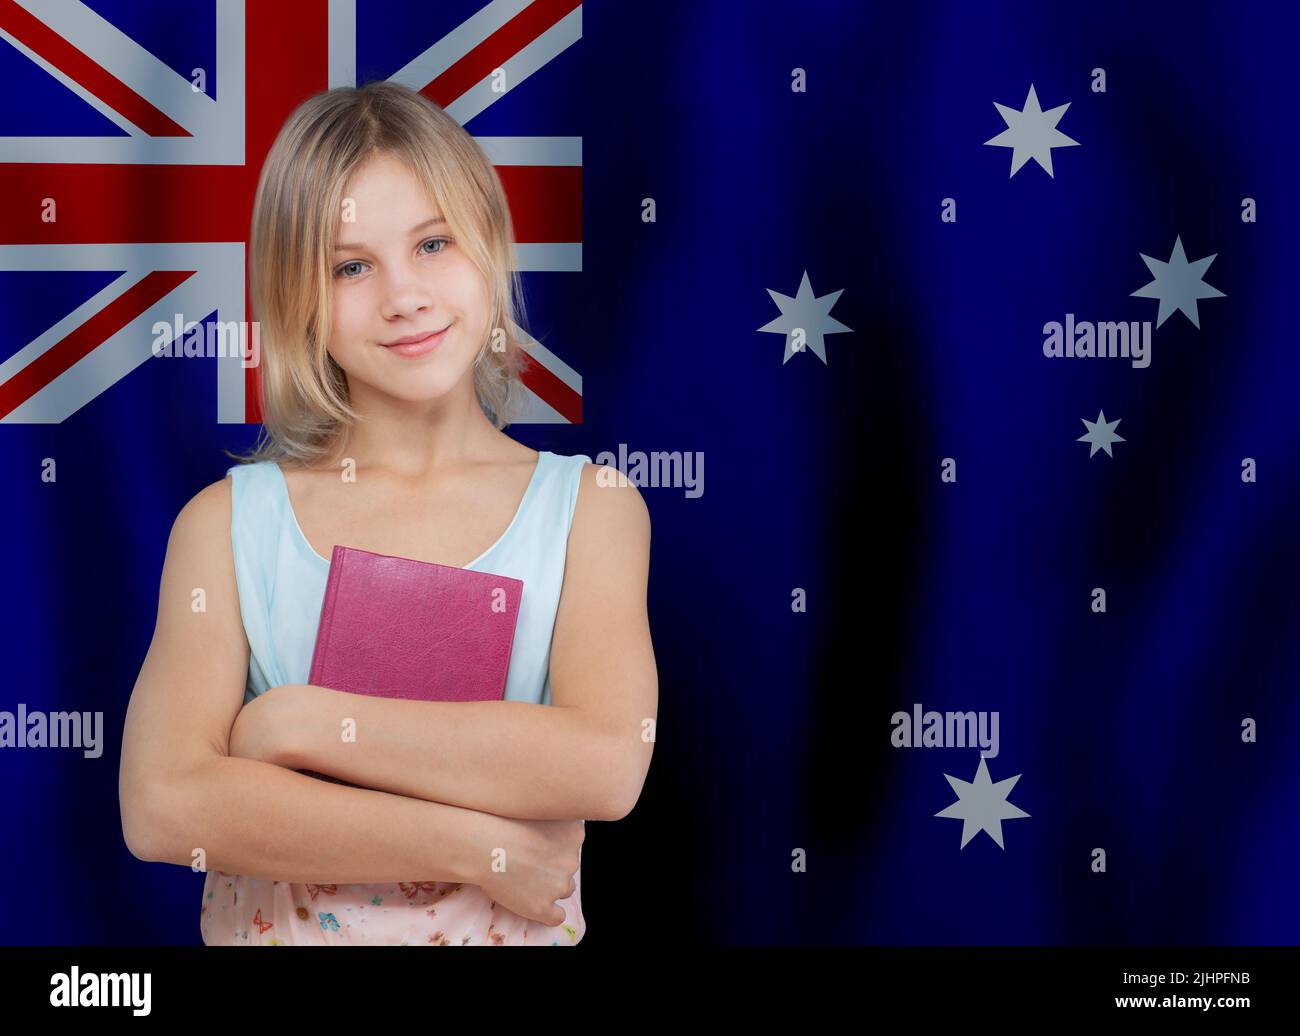 School student girl standing with book on Australian flag background. Education and school in Australia concept. Stock Photo